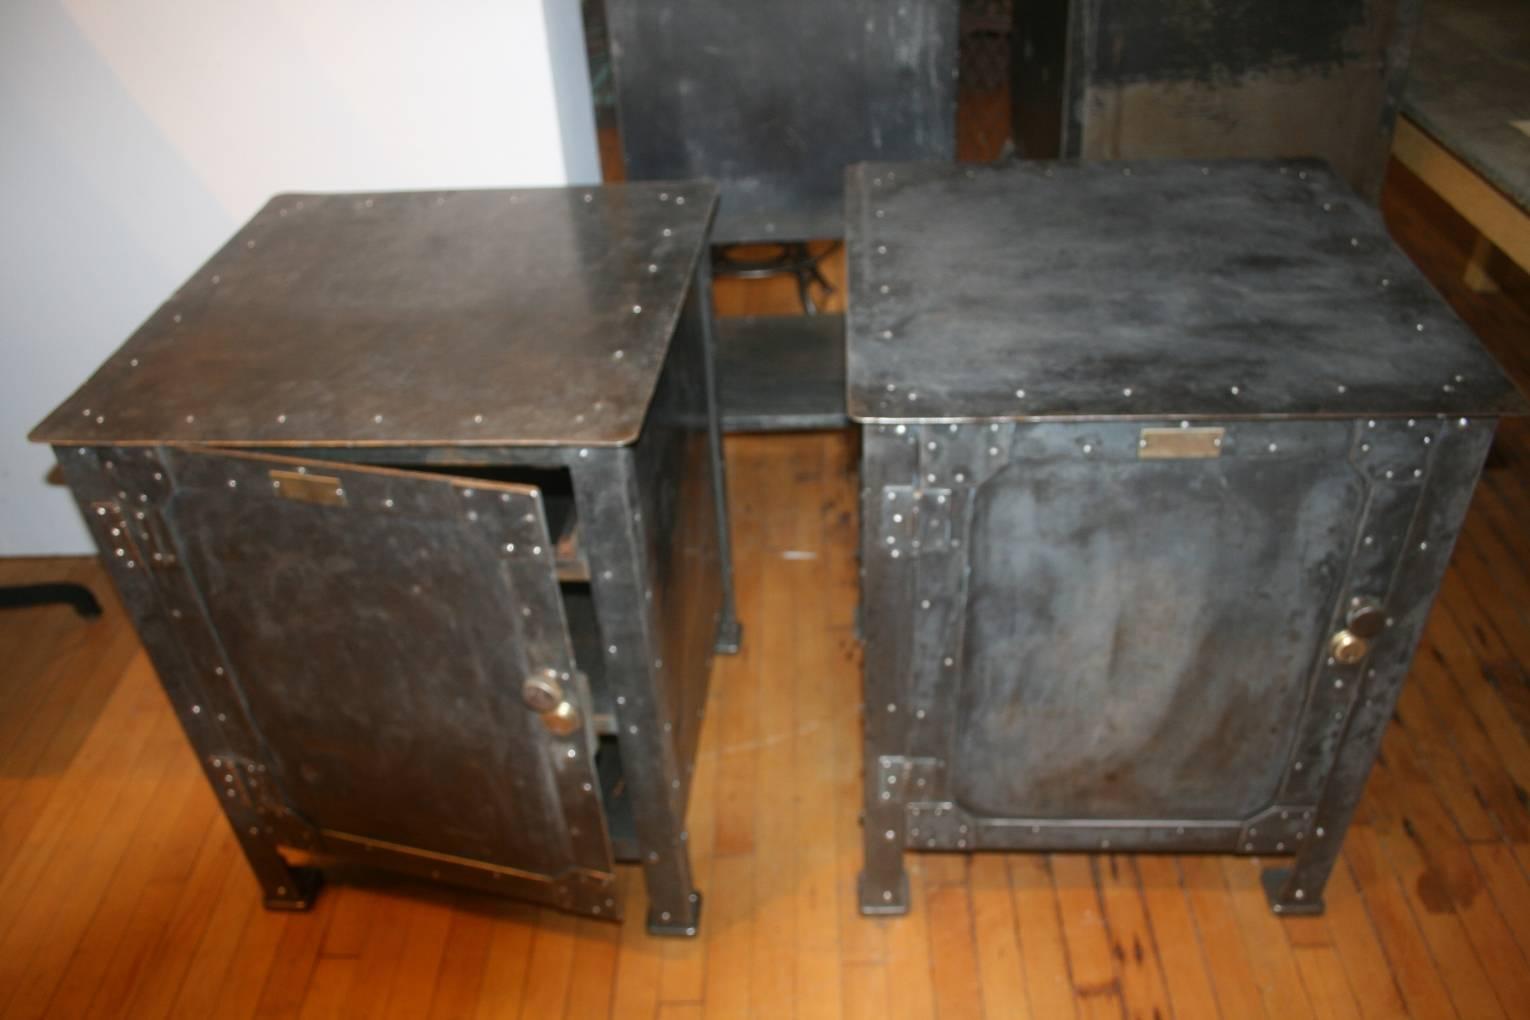 Awesome pair of steel cabinets. They are made of heavy gauge steel and are very heavy almost as if they were safes. The riveted steel has the best dark patina. I couldn't catch it in the photographs. Each cabinet has a wooden drawer on top with two